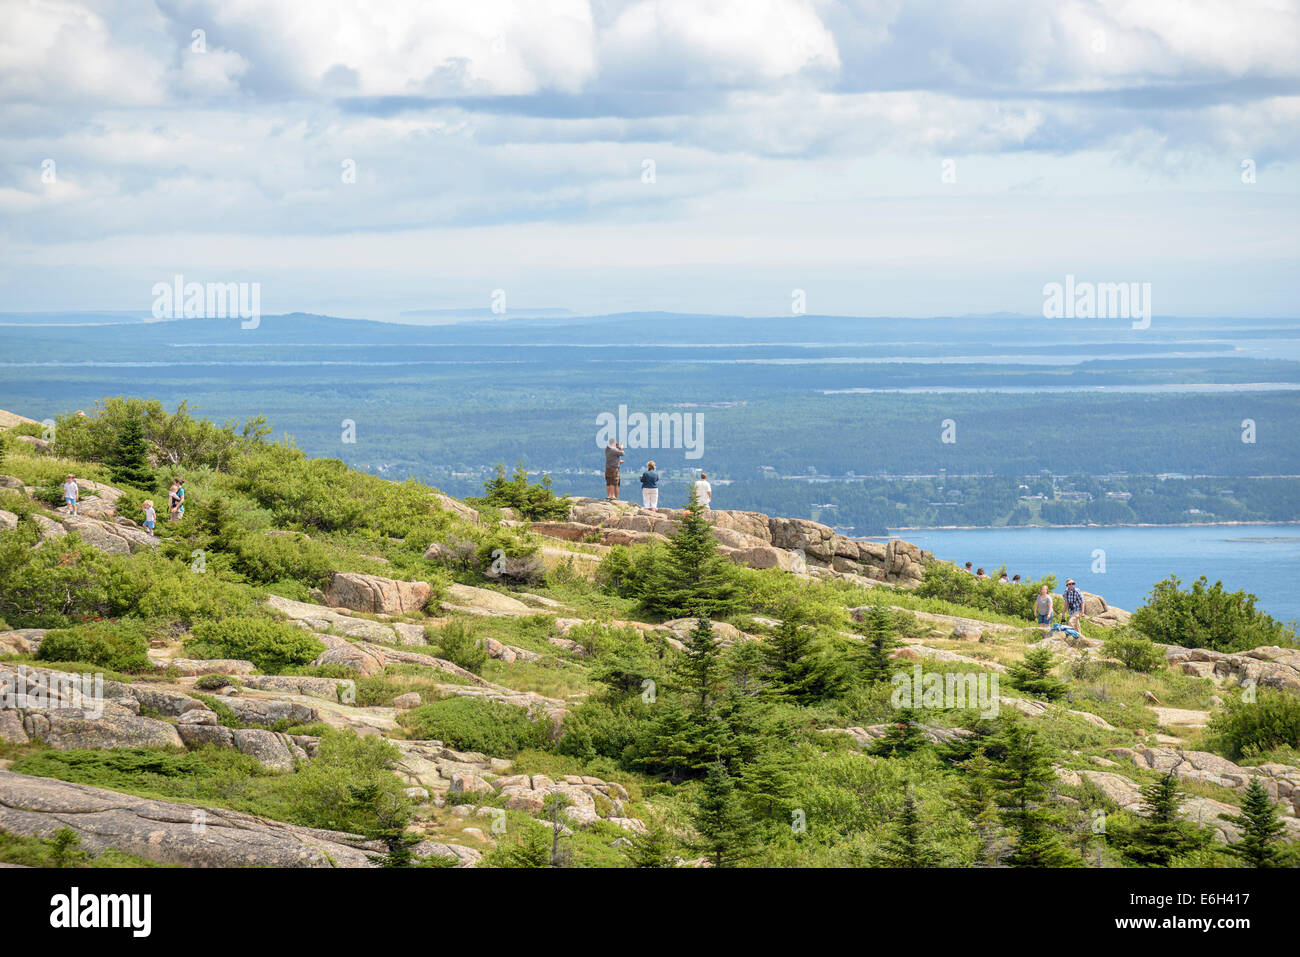 View From the Summit, Cadillac Mountain, Acadia National Park, Maine. Stock Photo